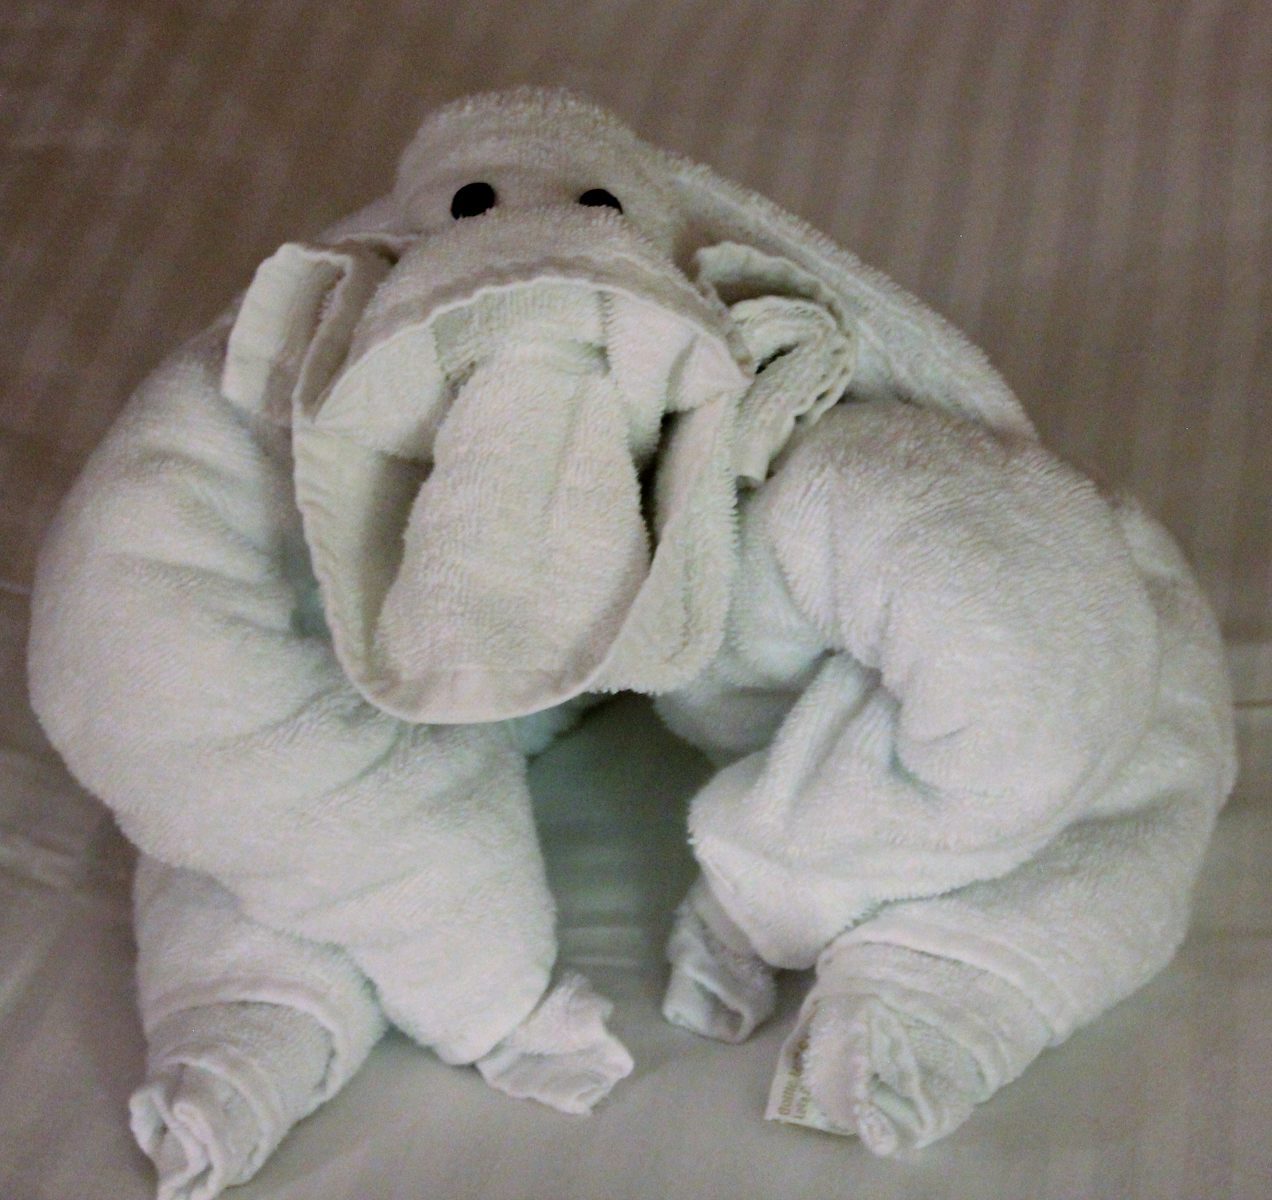 Love the towel animals!  Always a nice surprise!